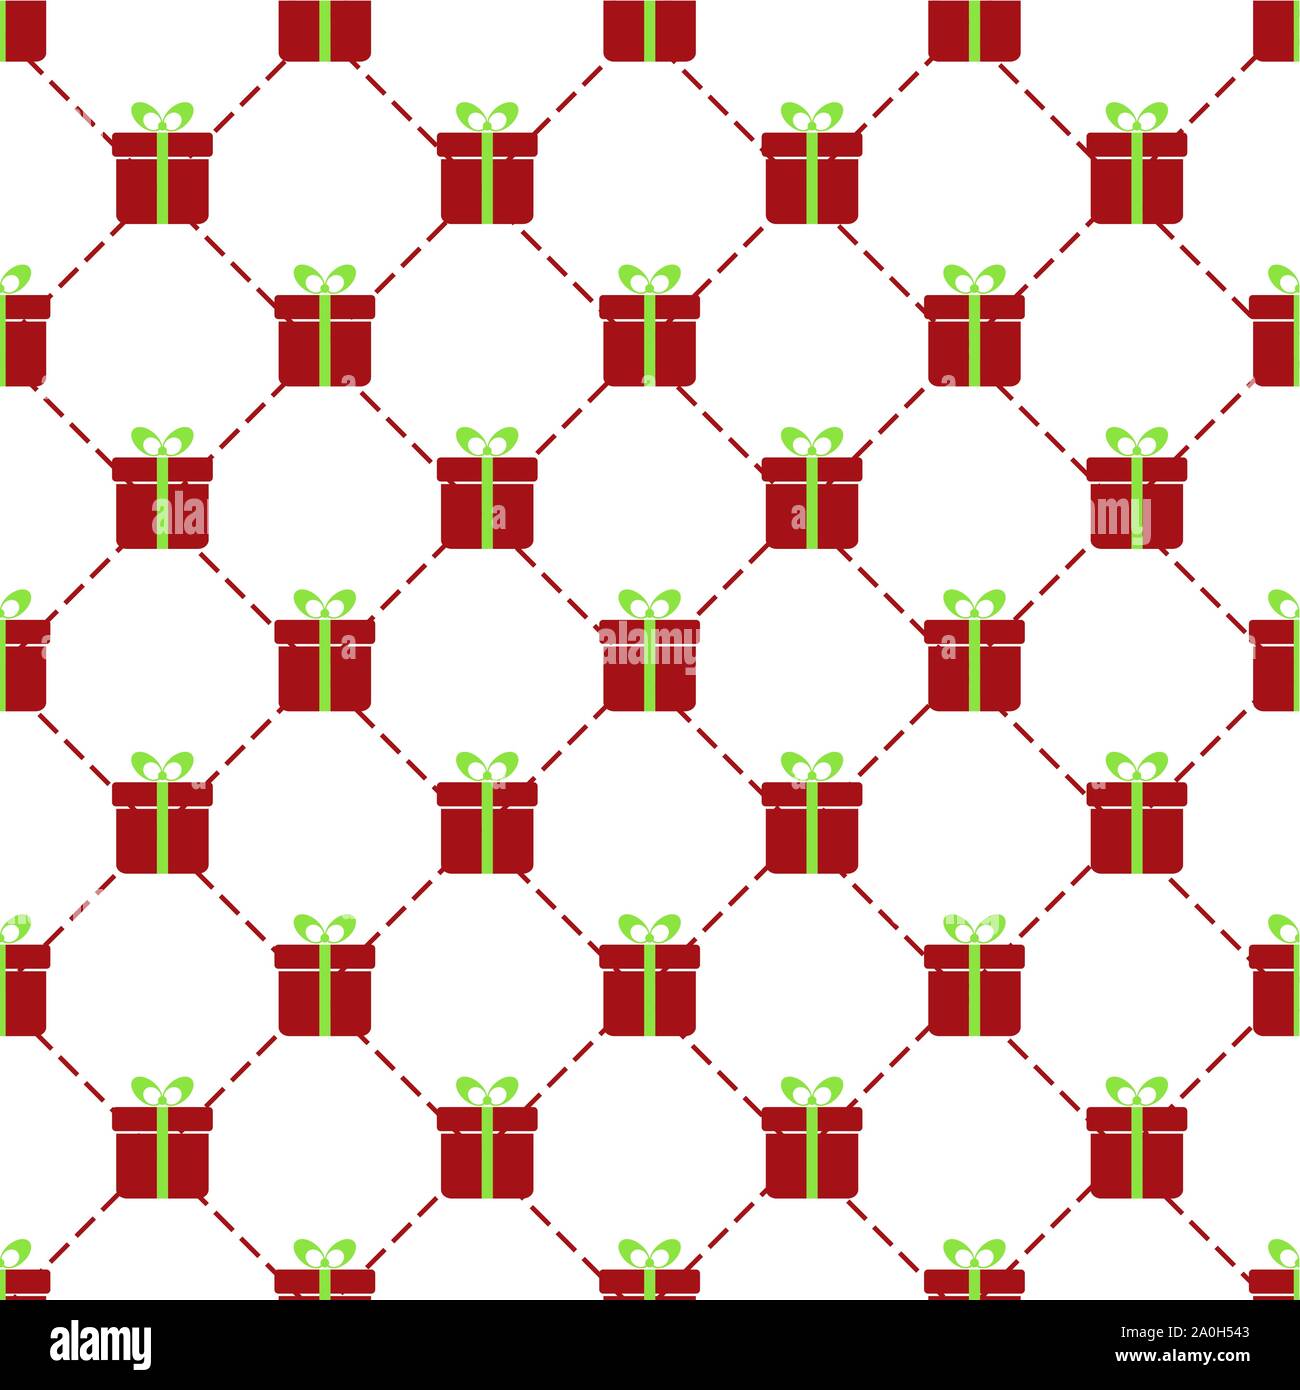 Christmas background with wrapping paper, scissors and Christmas